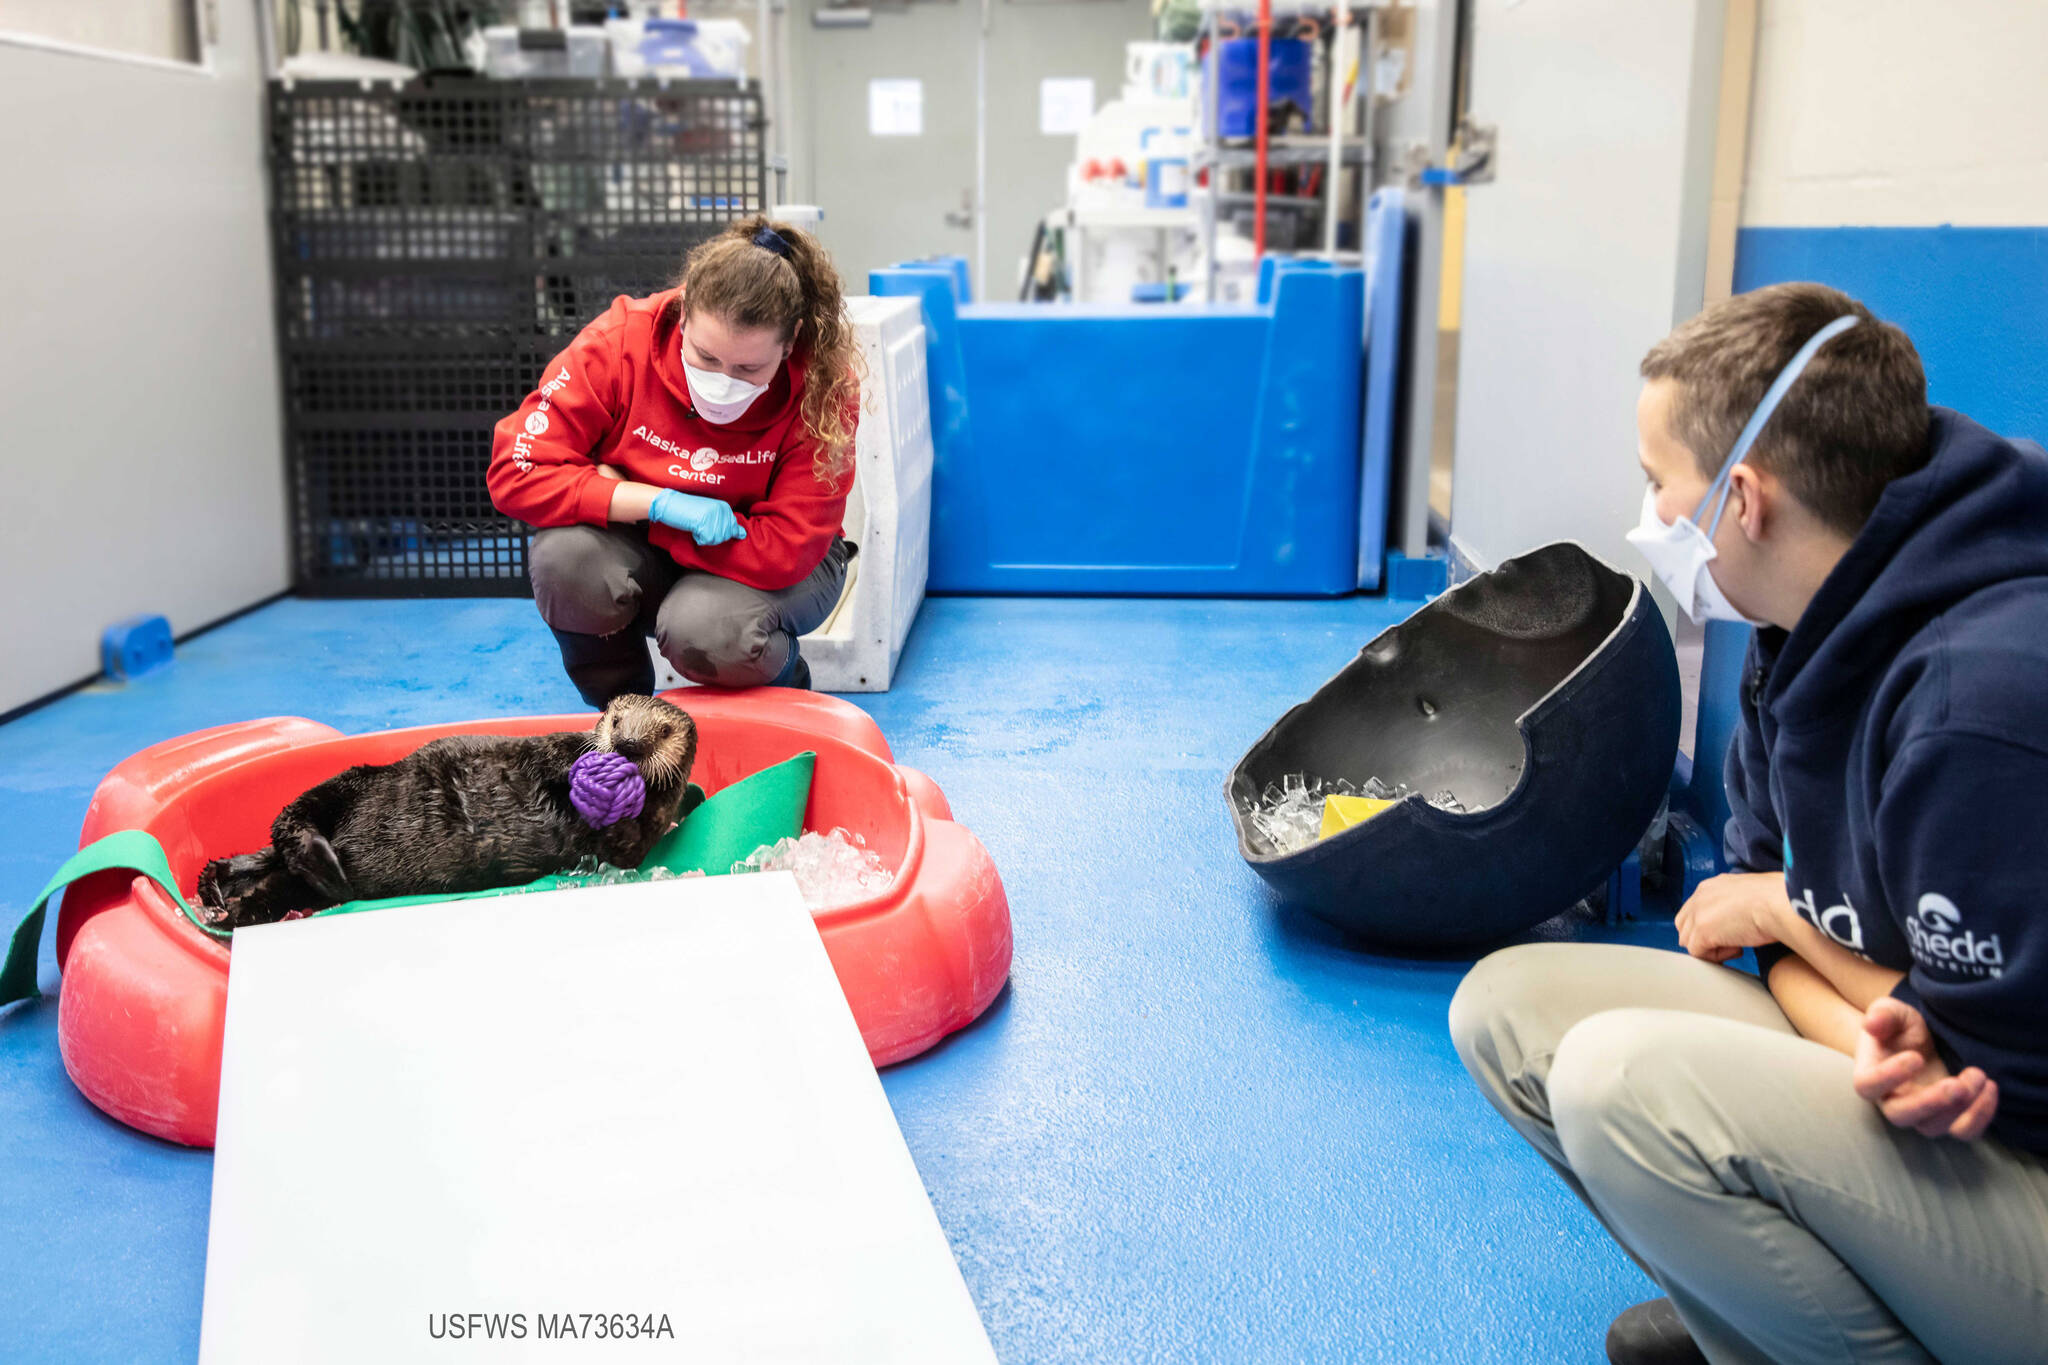 Savannah Costner, animal care specialist at ASLC, and Katy Roxbury, animal care specialist at Shedd, observe Qilak as he explores enrichment items like toys, ice and more at ASLC. (Photo Credit: Shedd Aquarium)